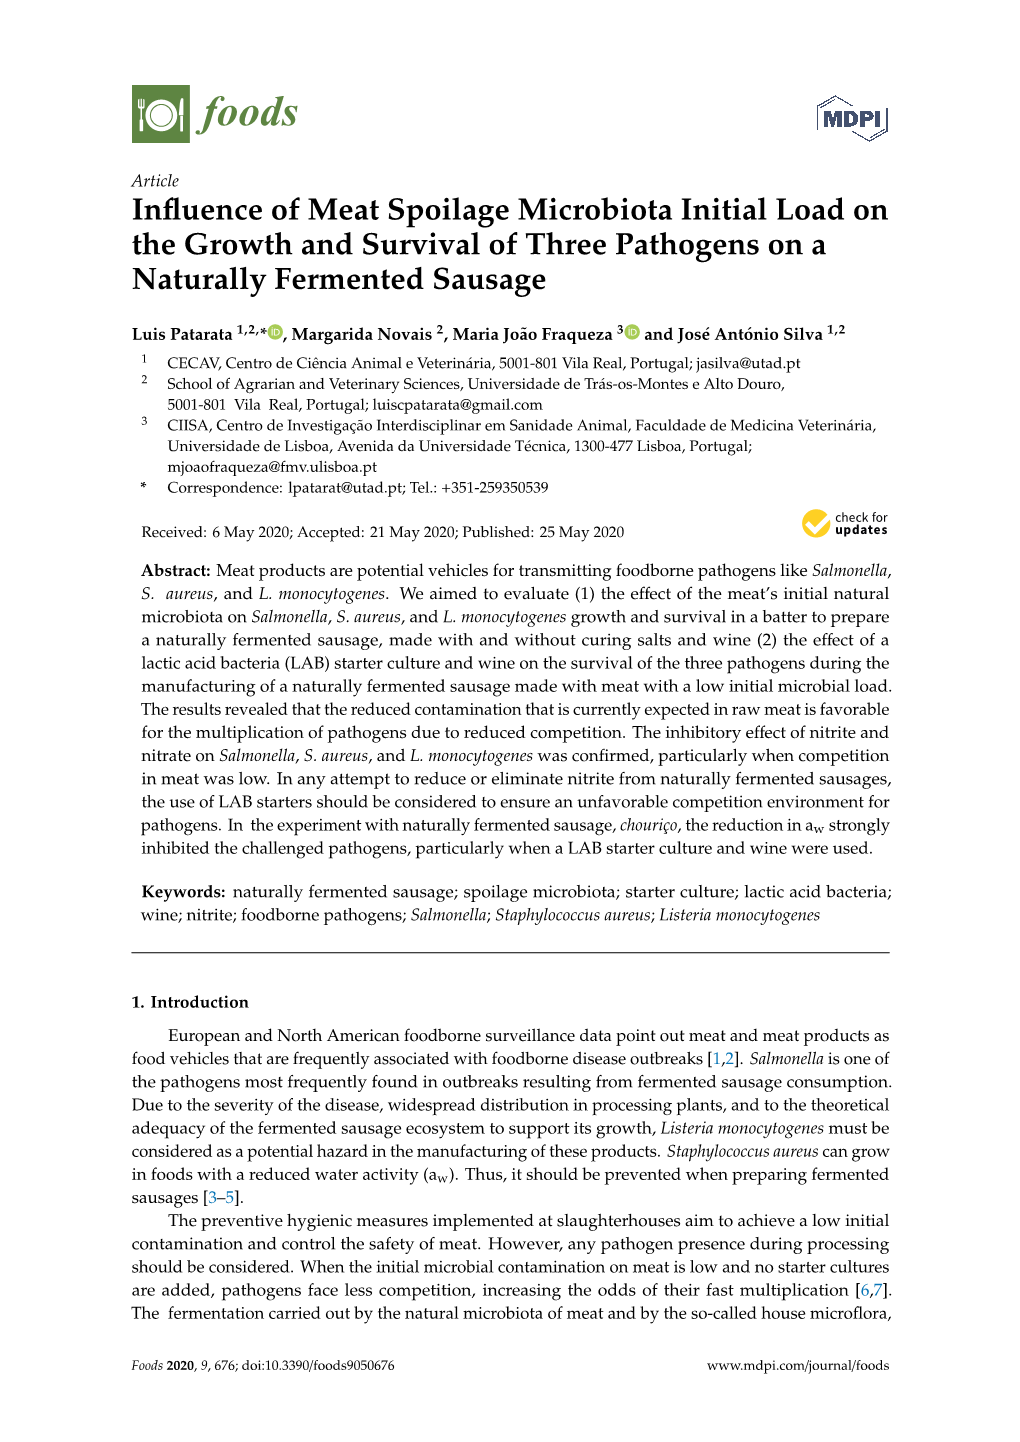 Influence of Meat Spoilage Microbiota Initial Load on the Growth and Survival of Three Pathogens on a Naturally Fermented Sausag